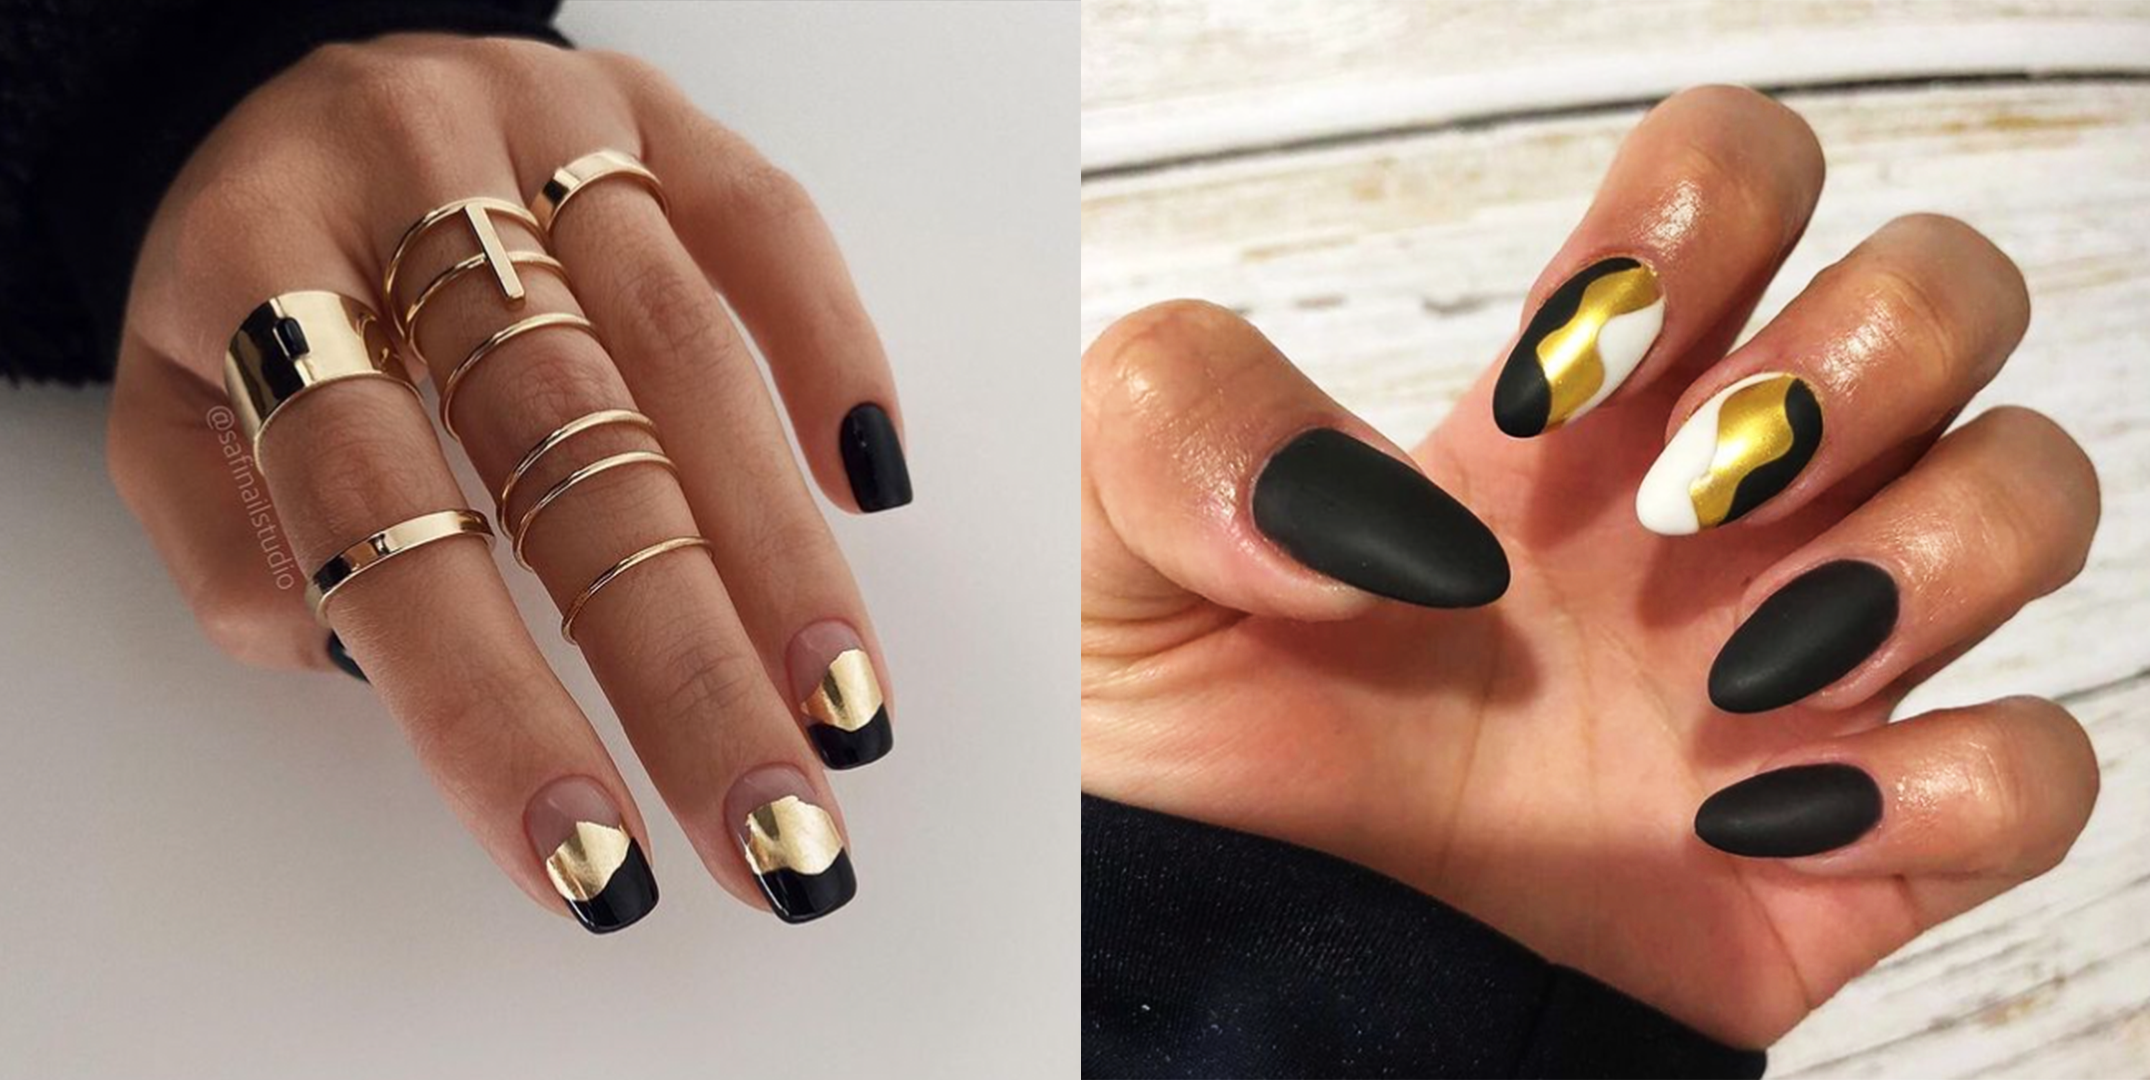 Astrology Nails Are Trending, and They're So Dreamy - Yahoo Sports